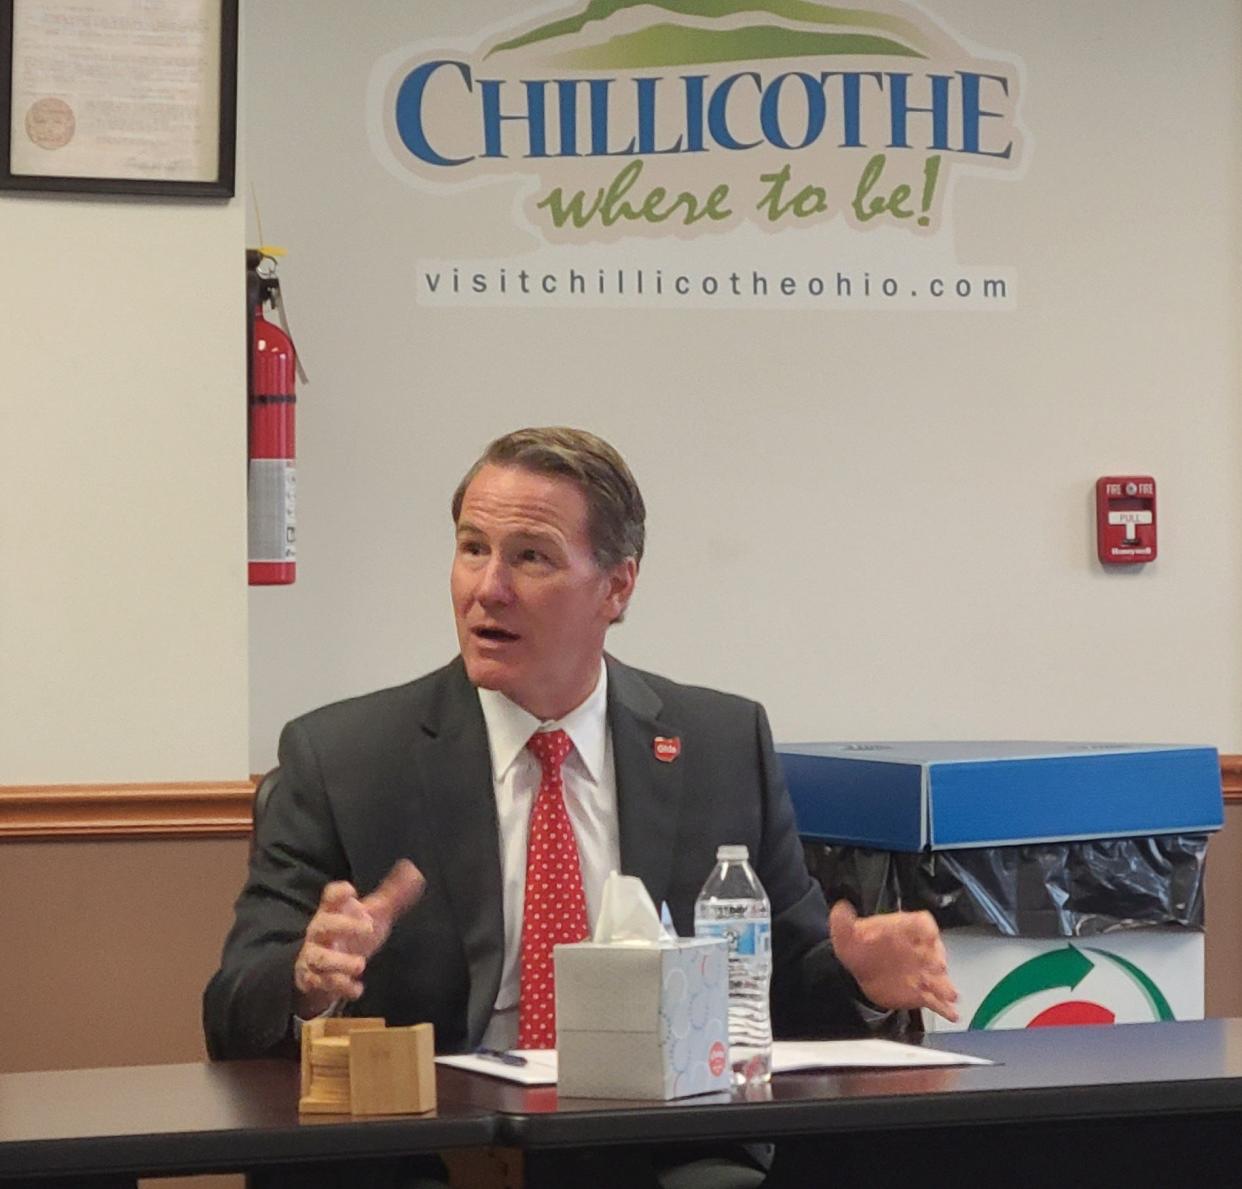 The Lt. Governor of Ohio Jon Husted visited Chillicothe to talk to local community and business leaders.